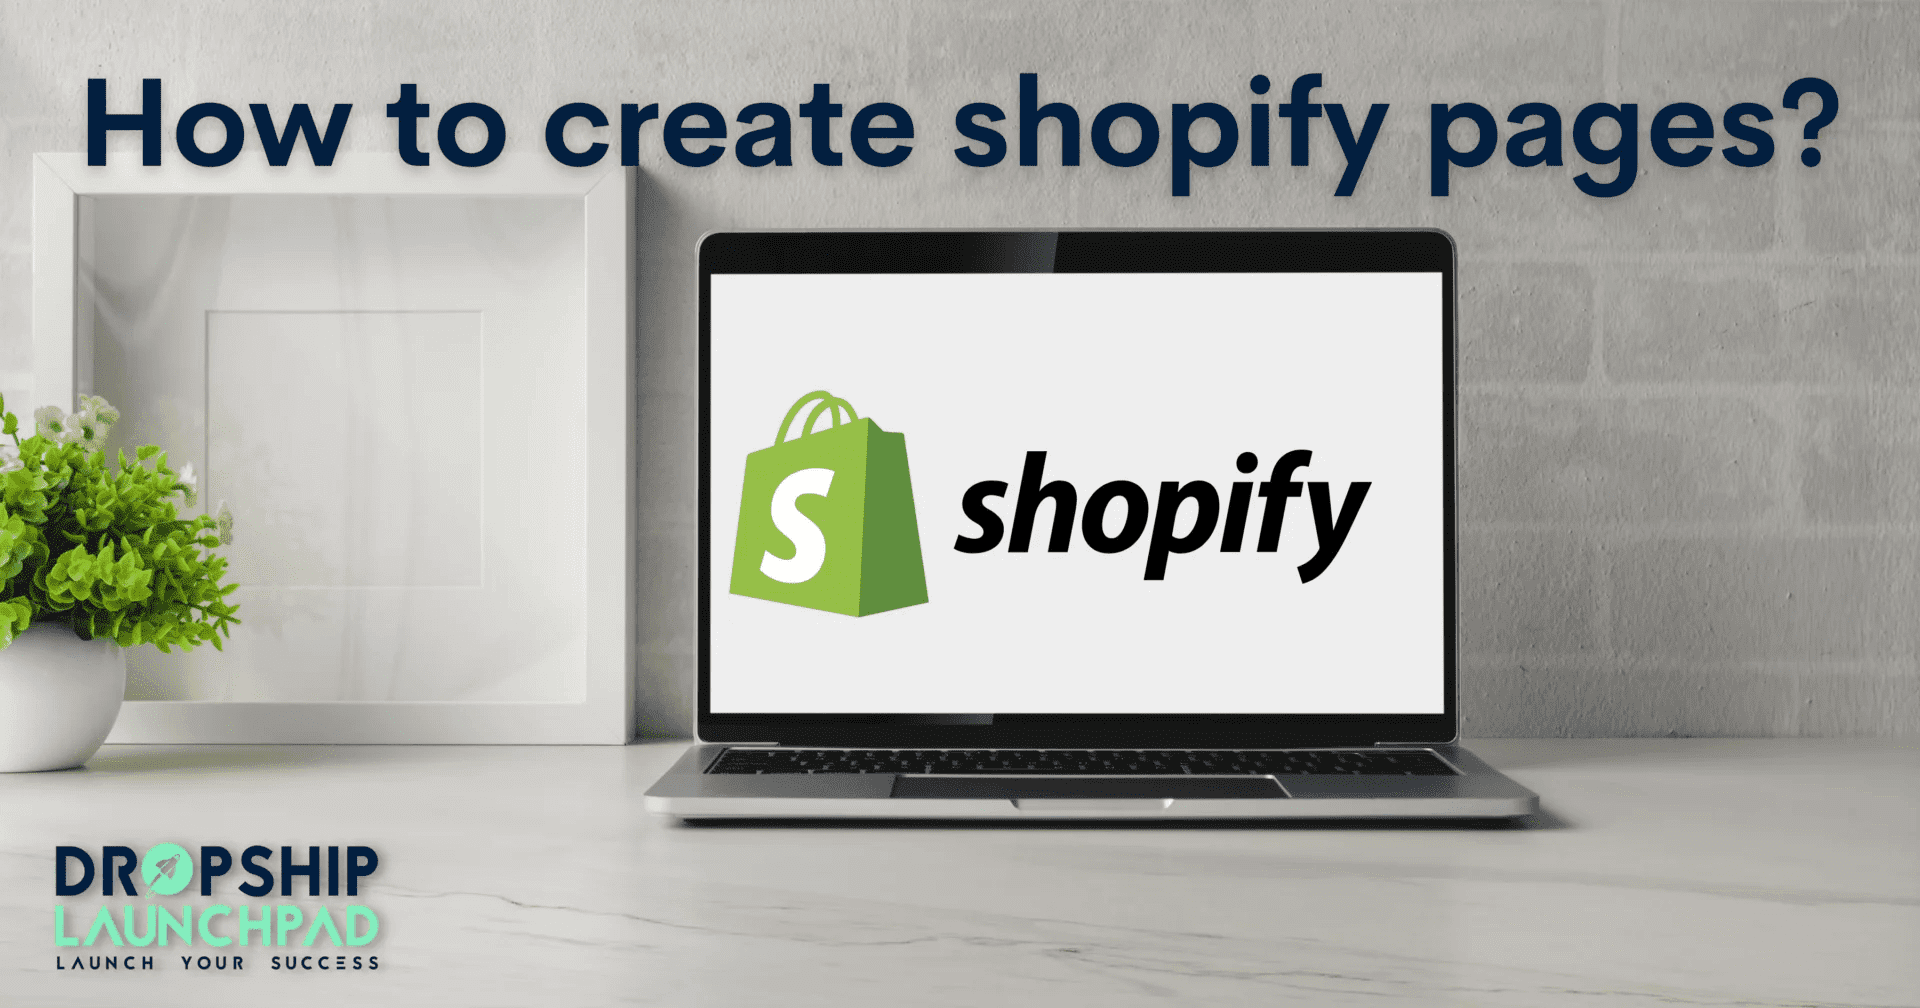 How to create shopify pages?